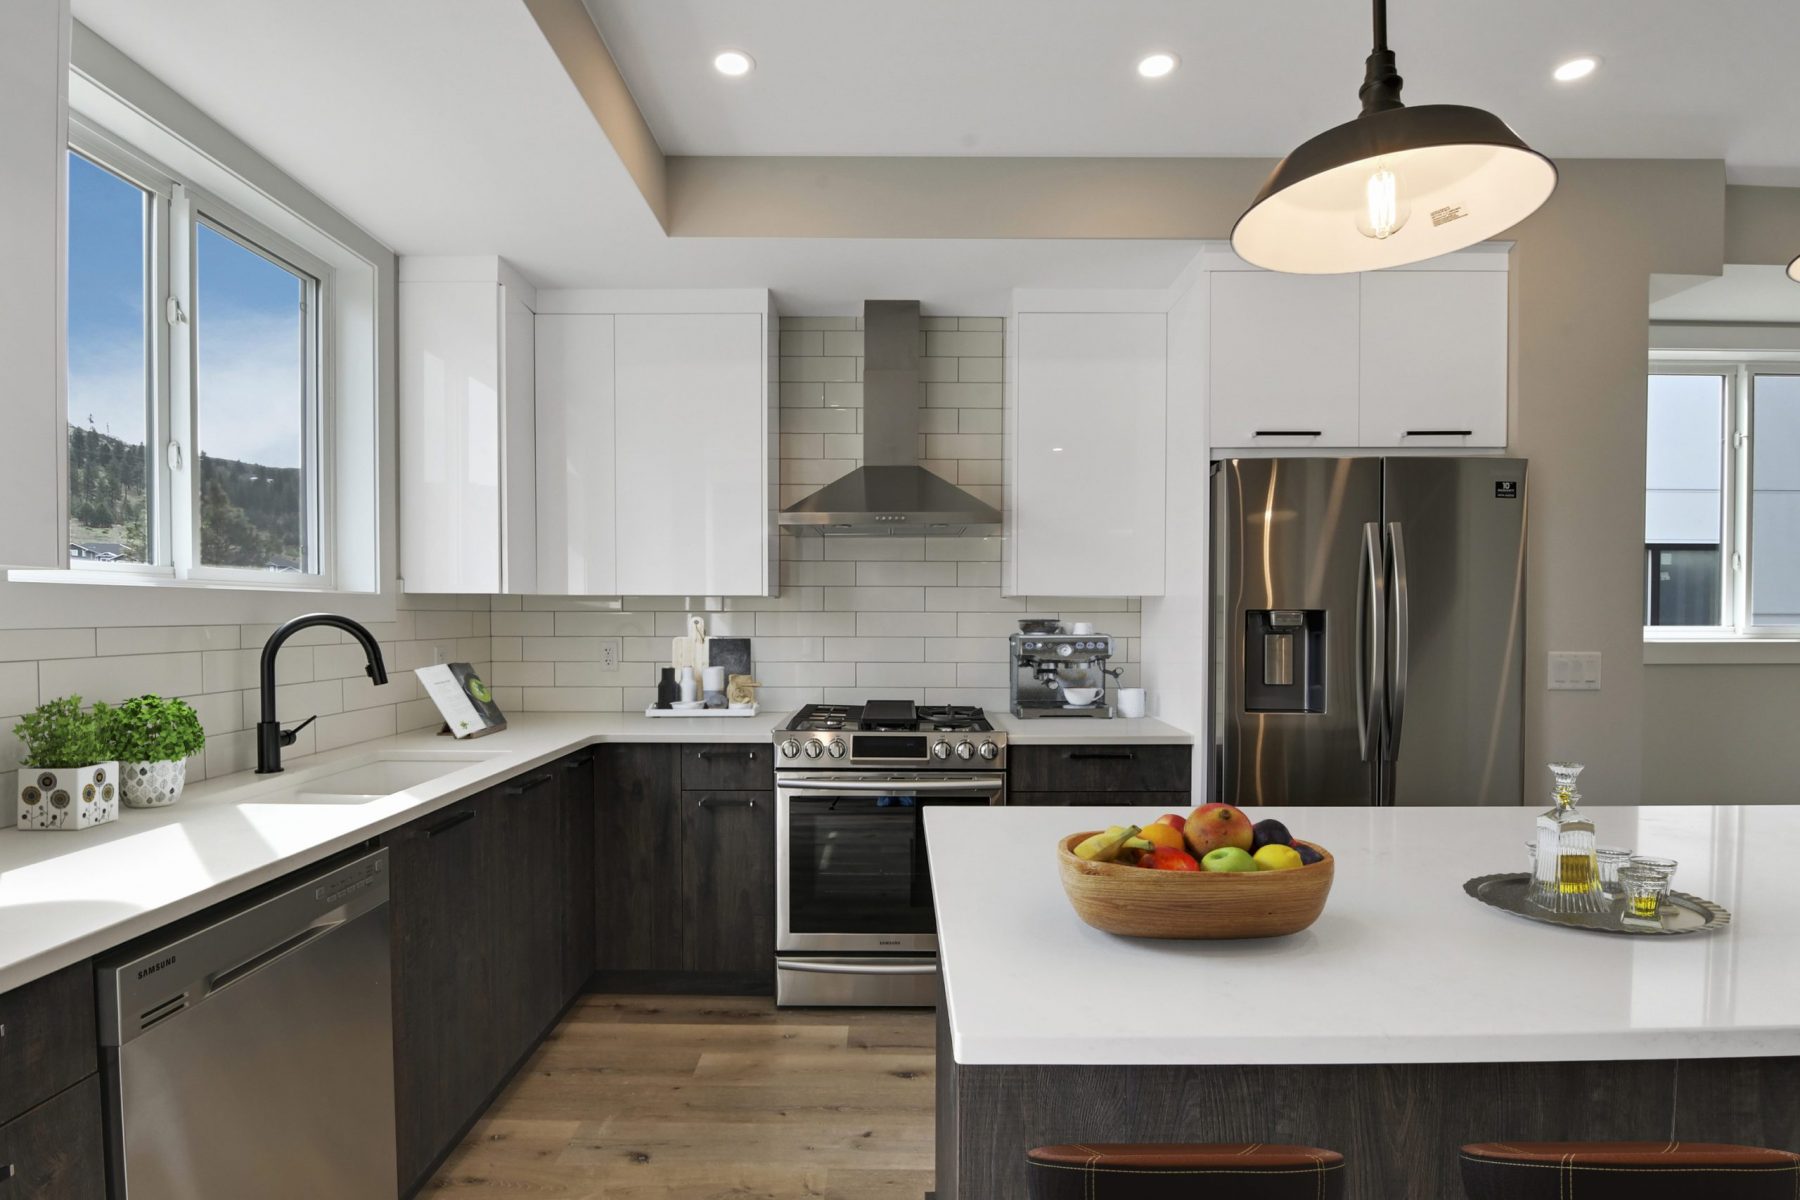 harmony_homes_the_ridge_multi_family_project_kitchen_area_gallery_image_4